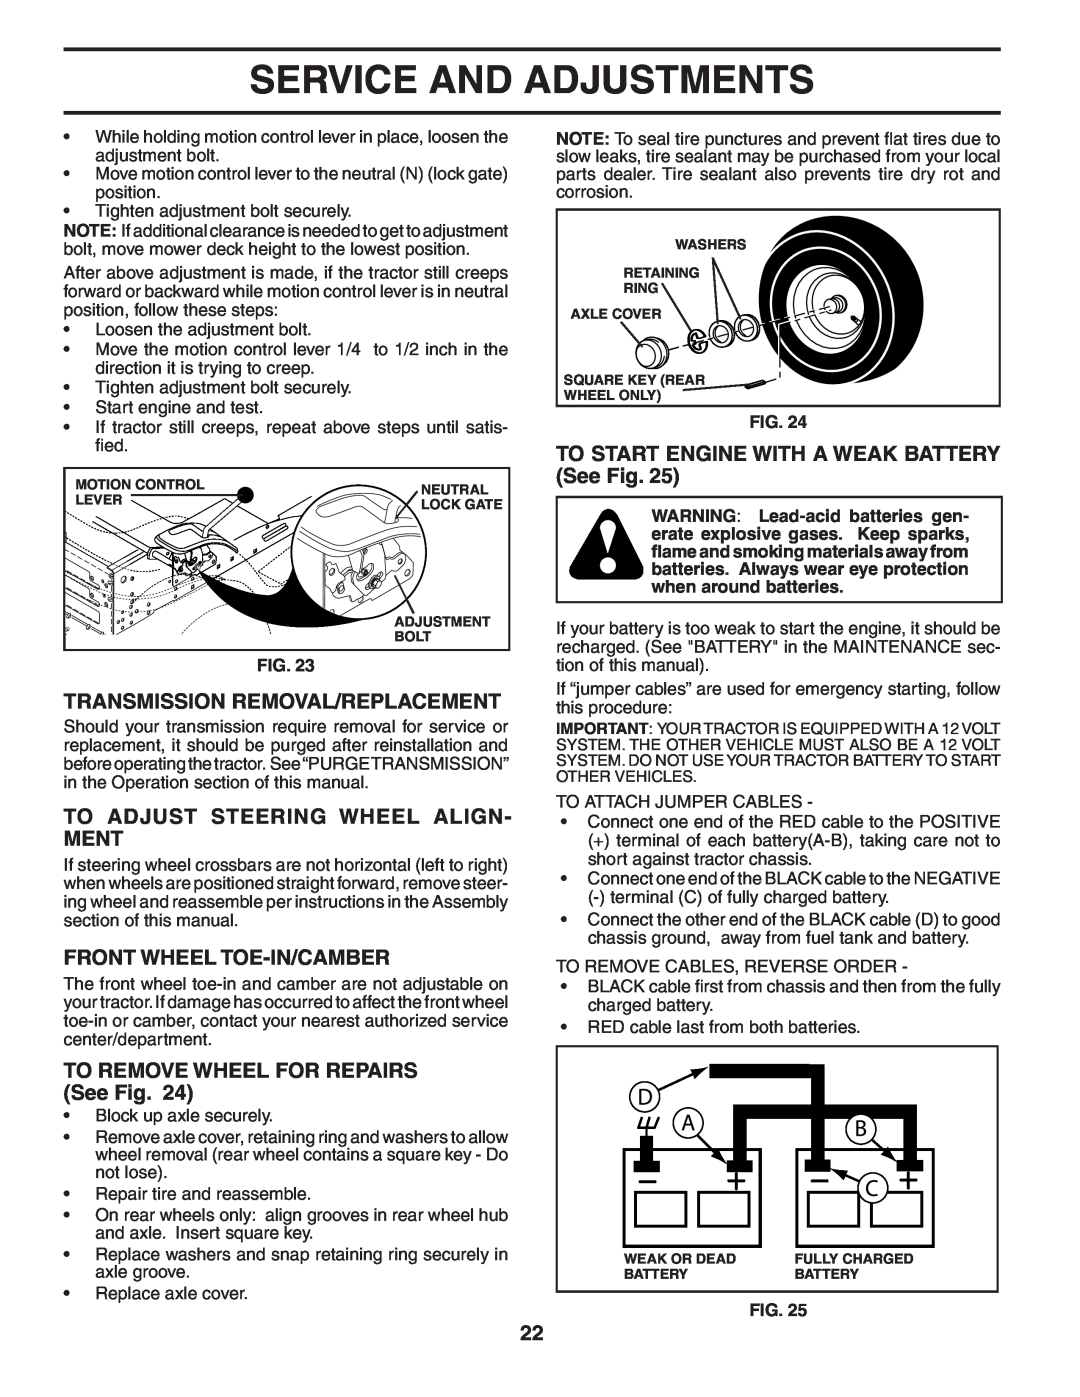 Poulan 194992 manual Transmission Removal/Replacement, To Adjust Steering Wheel Align- Ment, Front Wheel Toe-In/Camber 